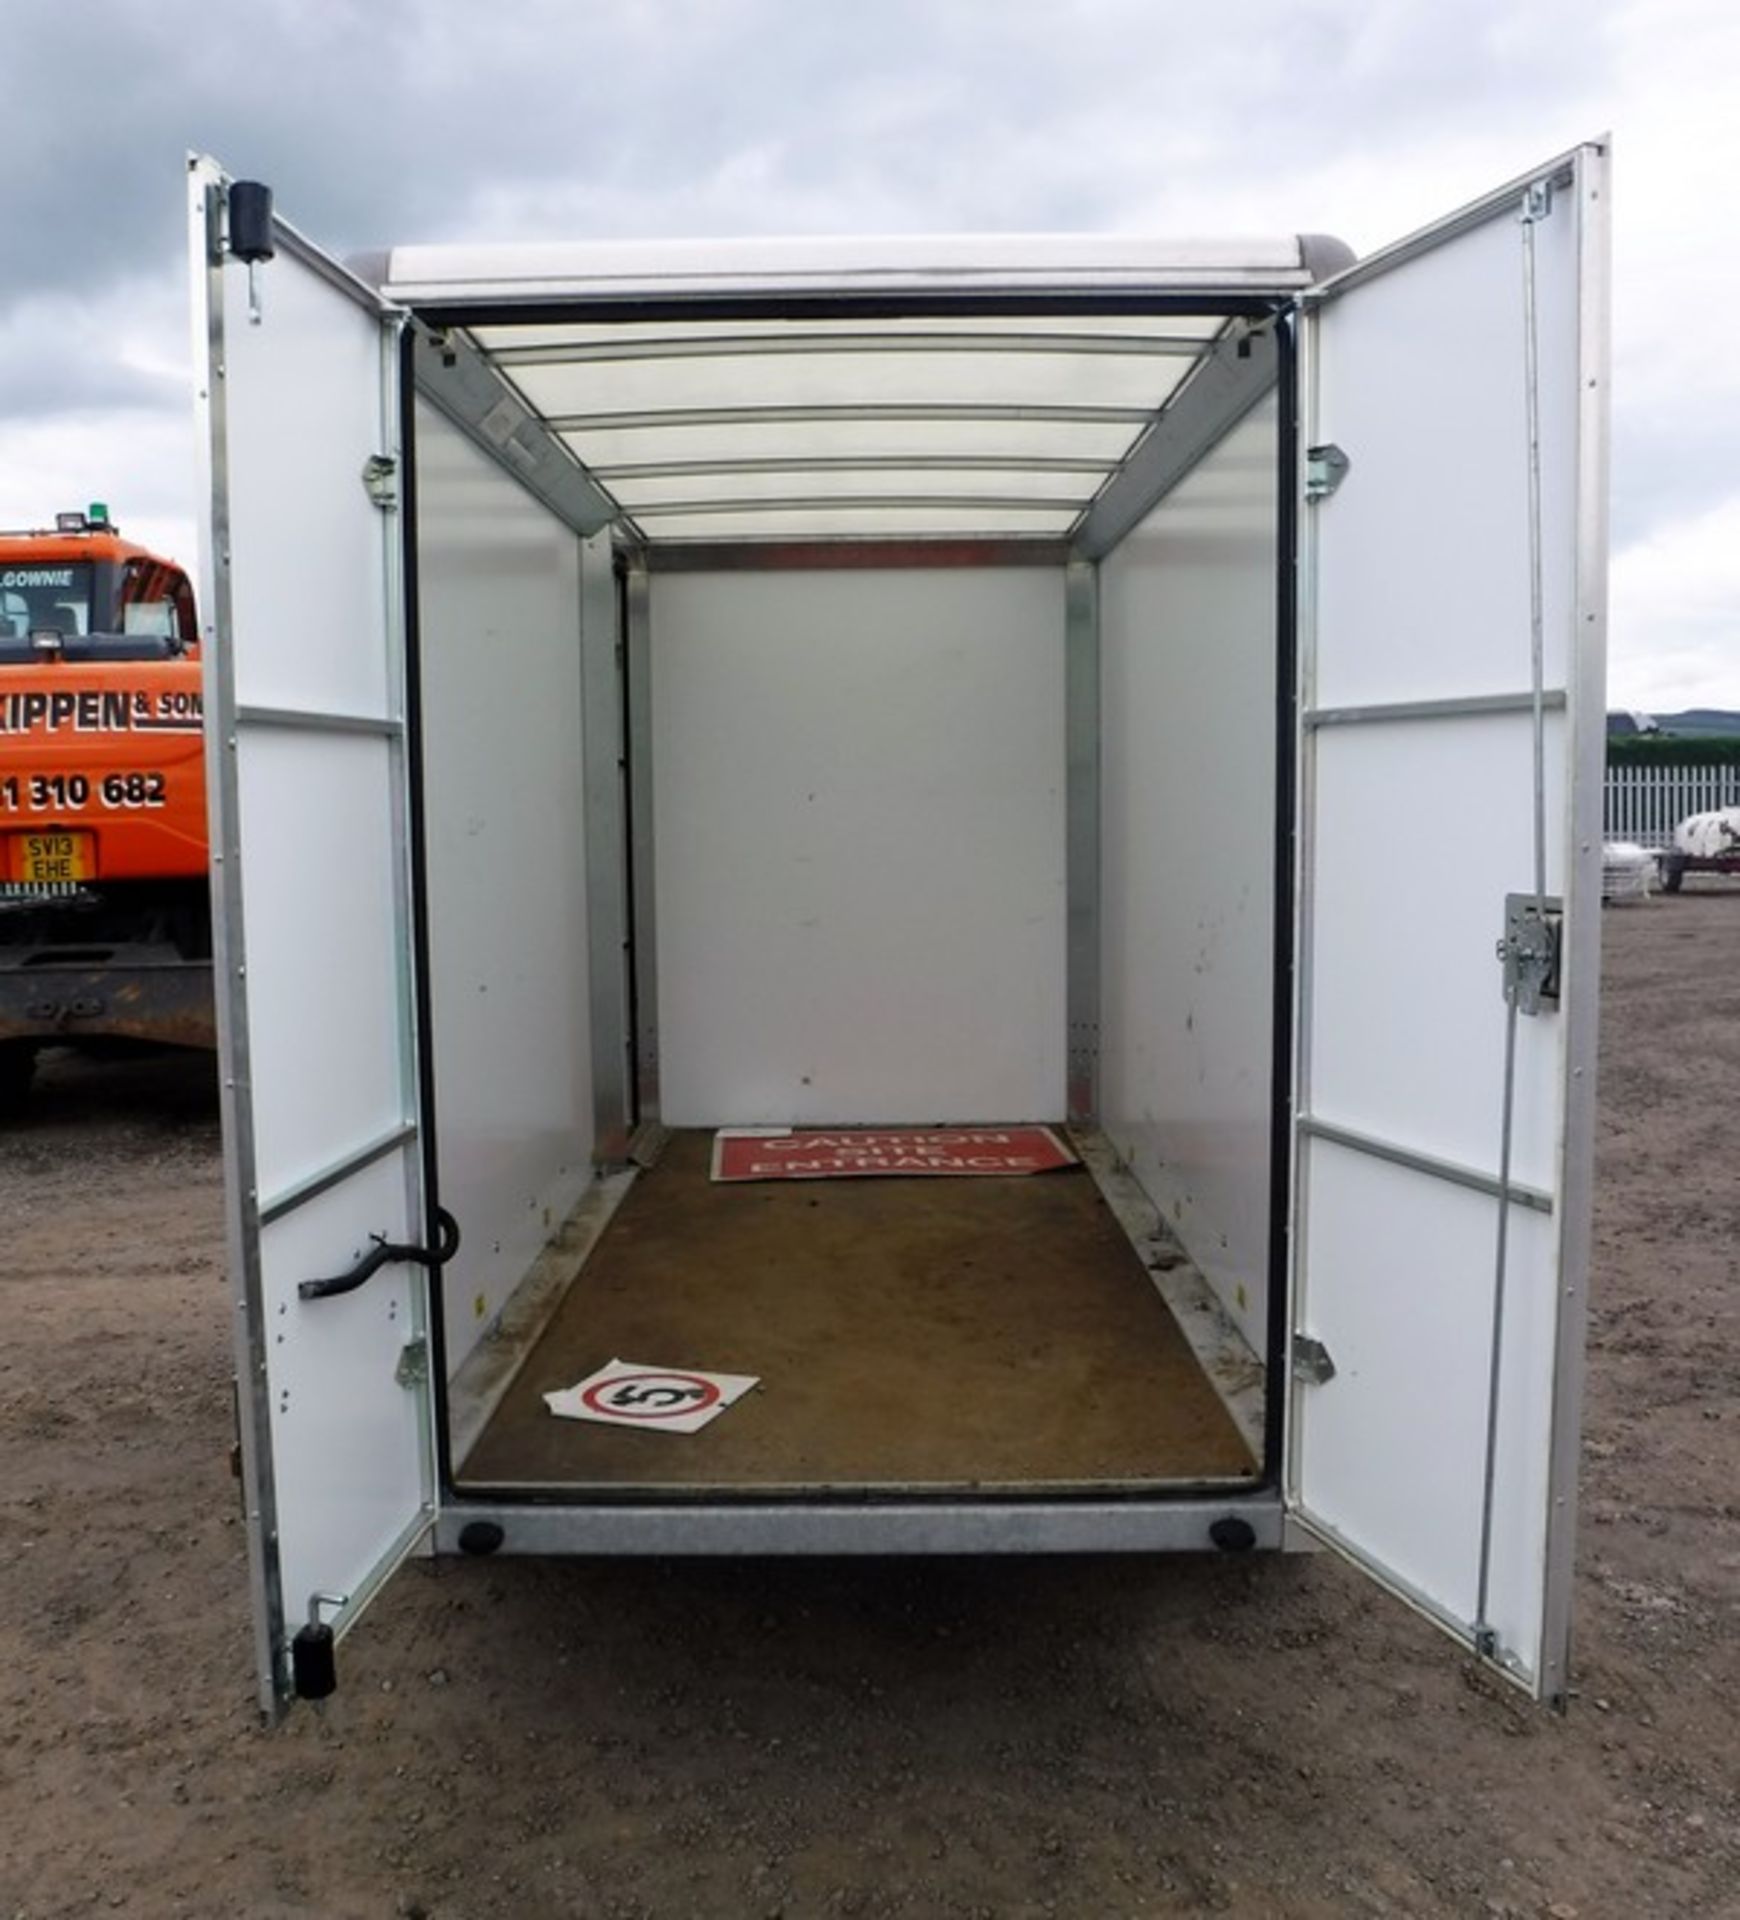 INDESPENSION BOX TRAILER WITH 2 OPENING BACK DOORS & 1 SIDE DOOR, 10FT X 5FT (APPROX) S/N213526 ASSE - Image 5 of 12